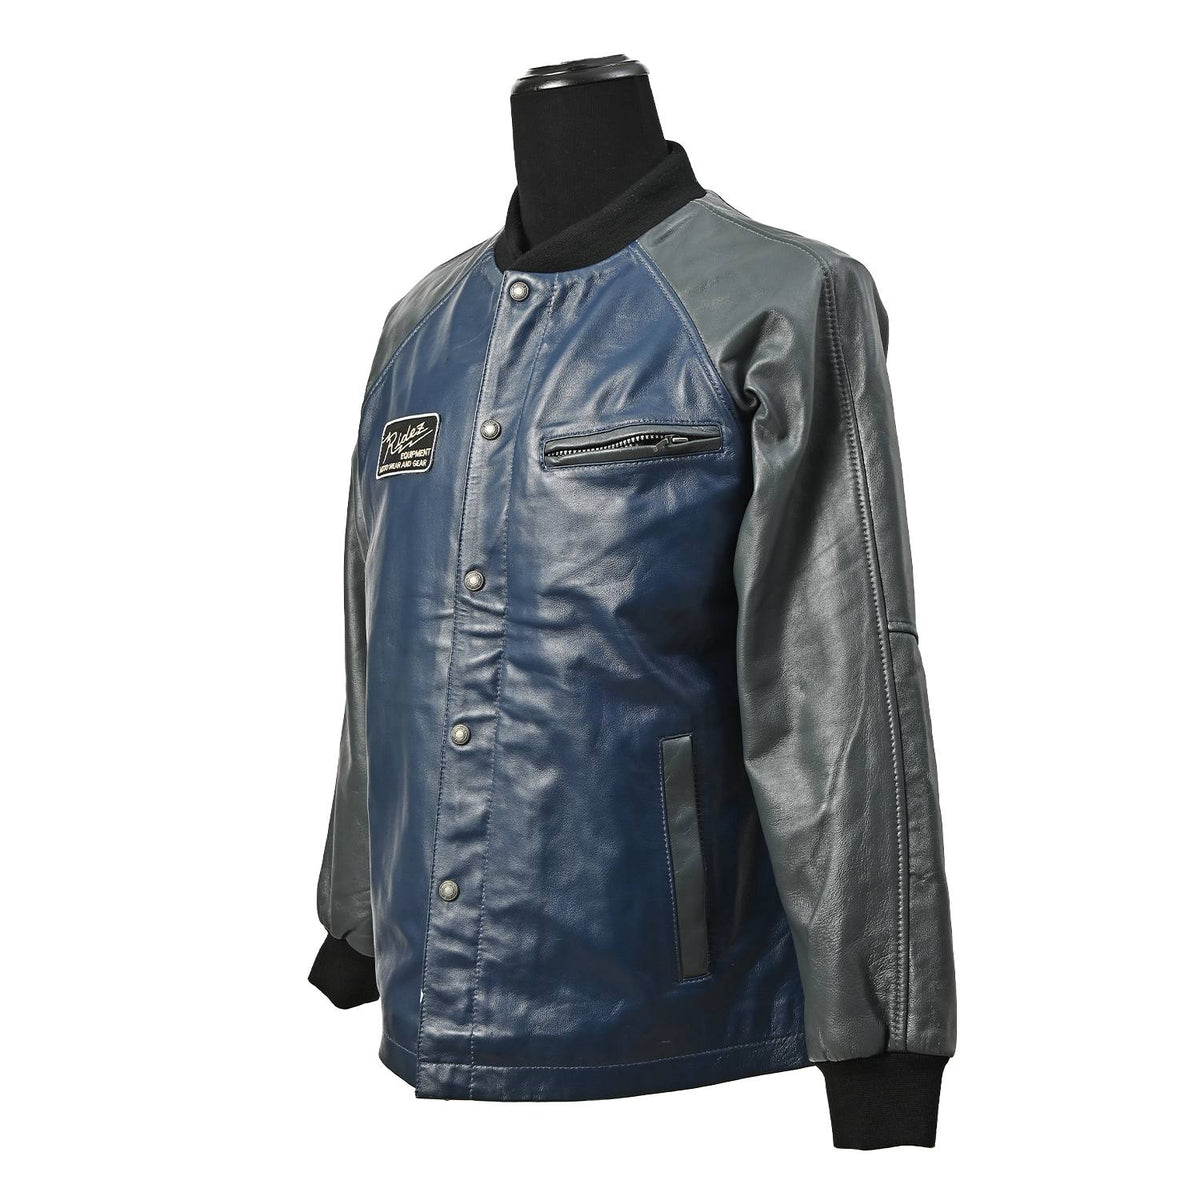 Now on sale is the RIDEZ car club coat that looks great on old 